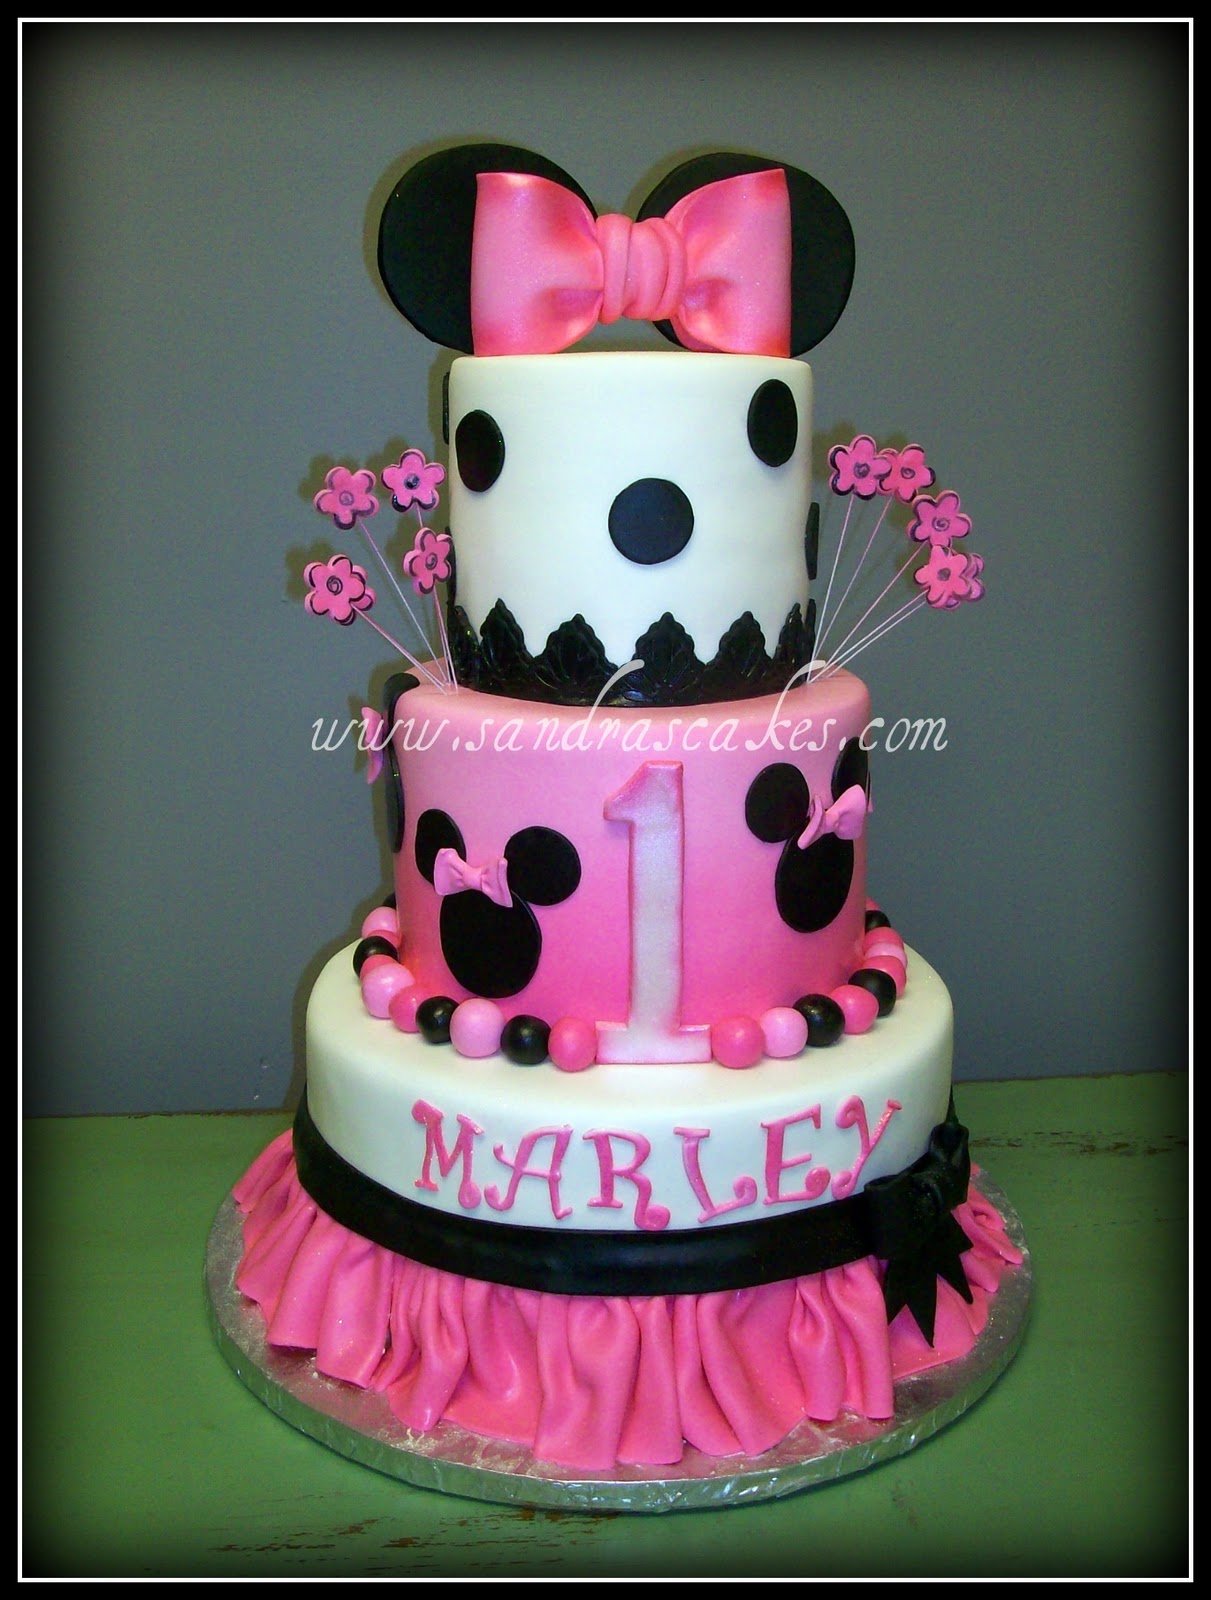 10 Cutest Minnie Mouse Cakes Everyone Will Love - Pretty ...